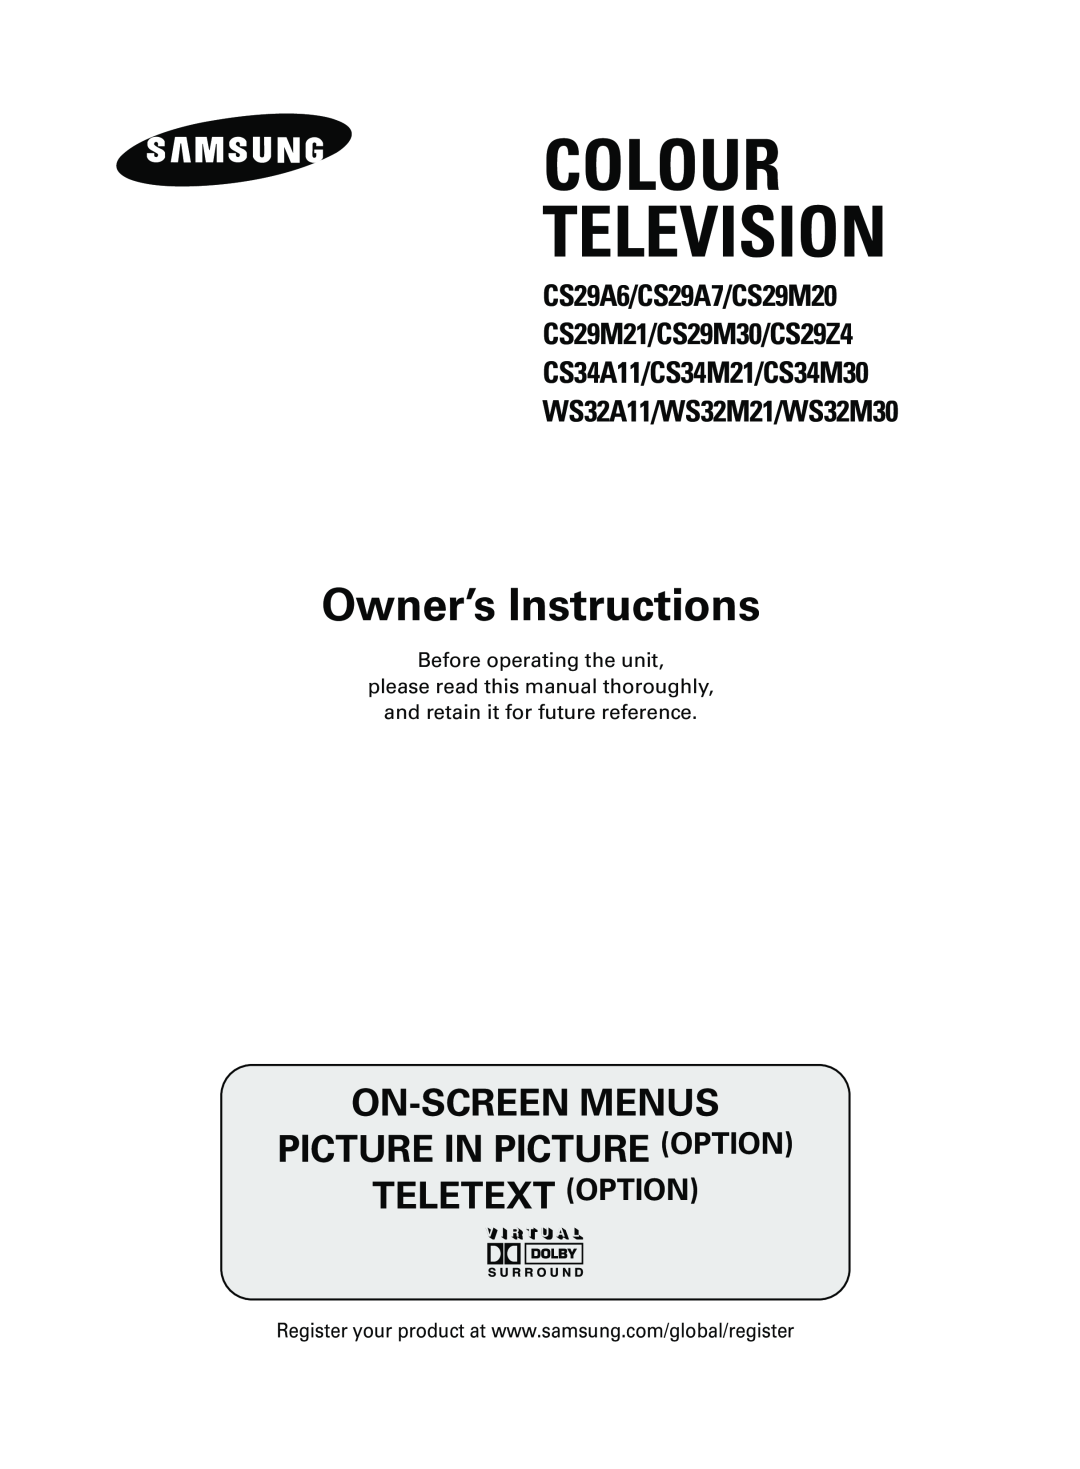 Samsung CS34M21 manual Colour Television, Owner’s Instructions, On-Screen Menus Picture In Picture Option Teletext Option 